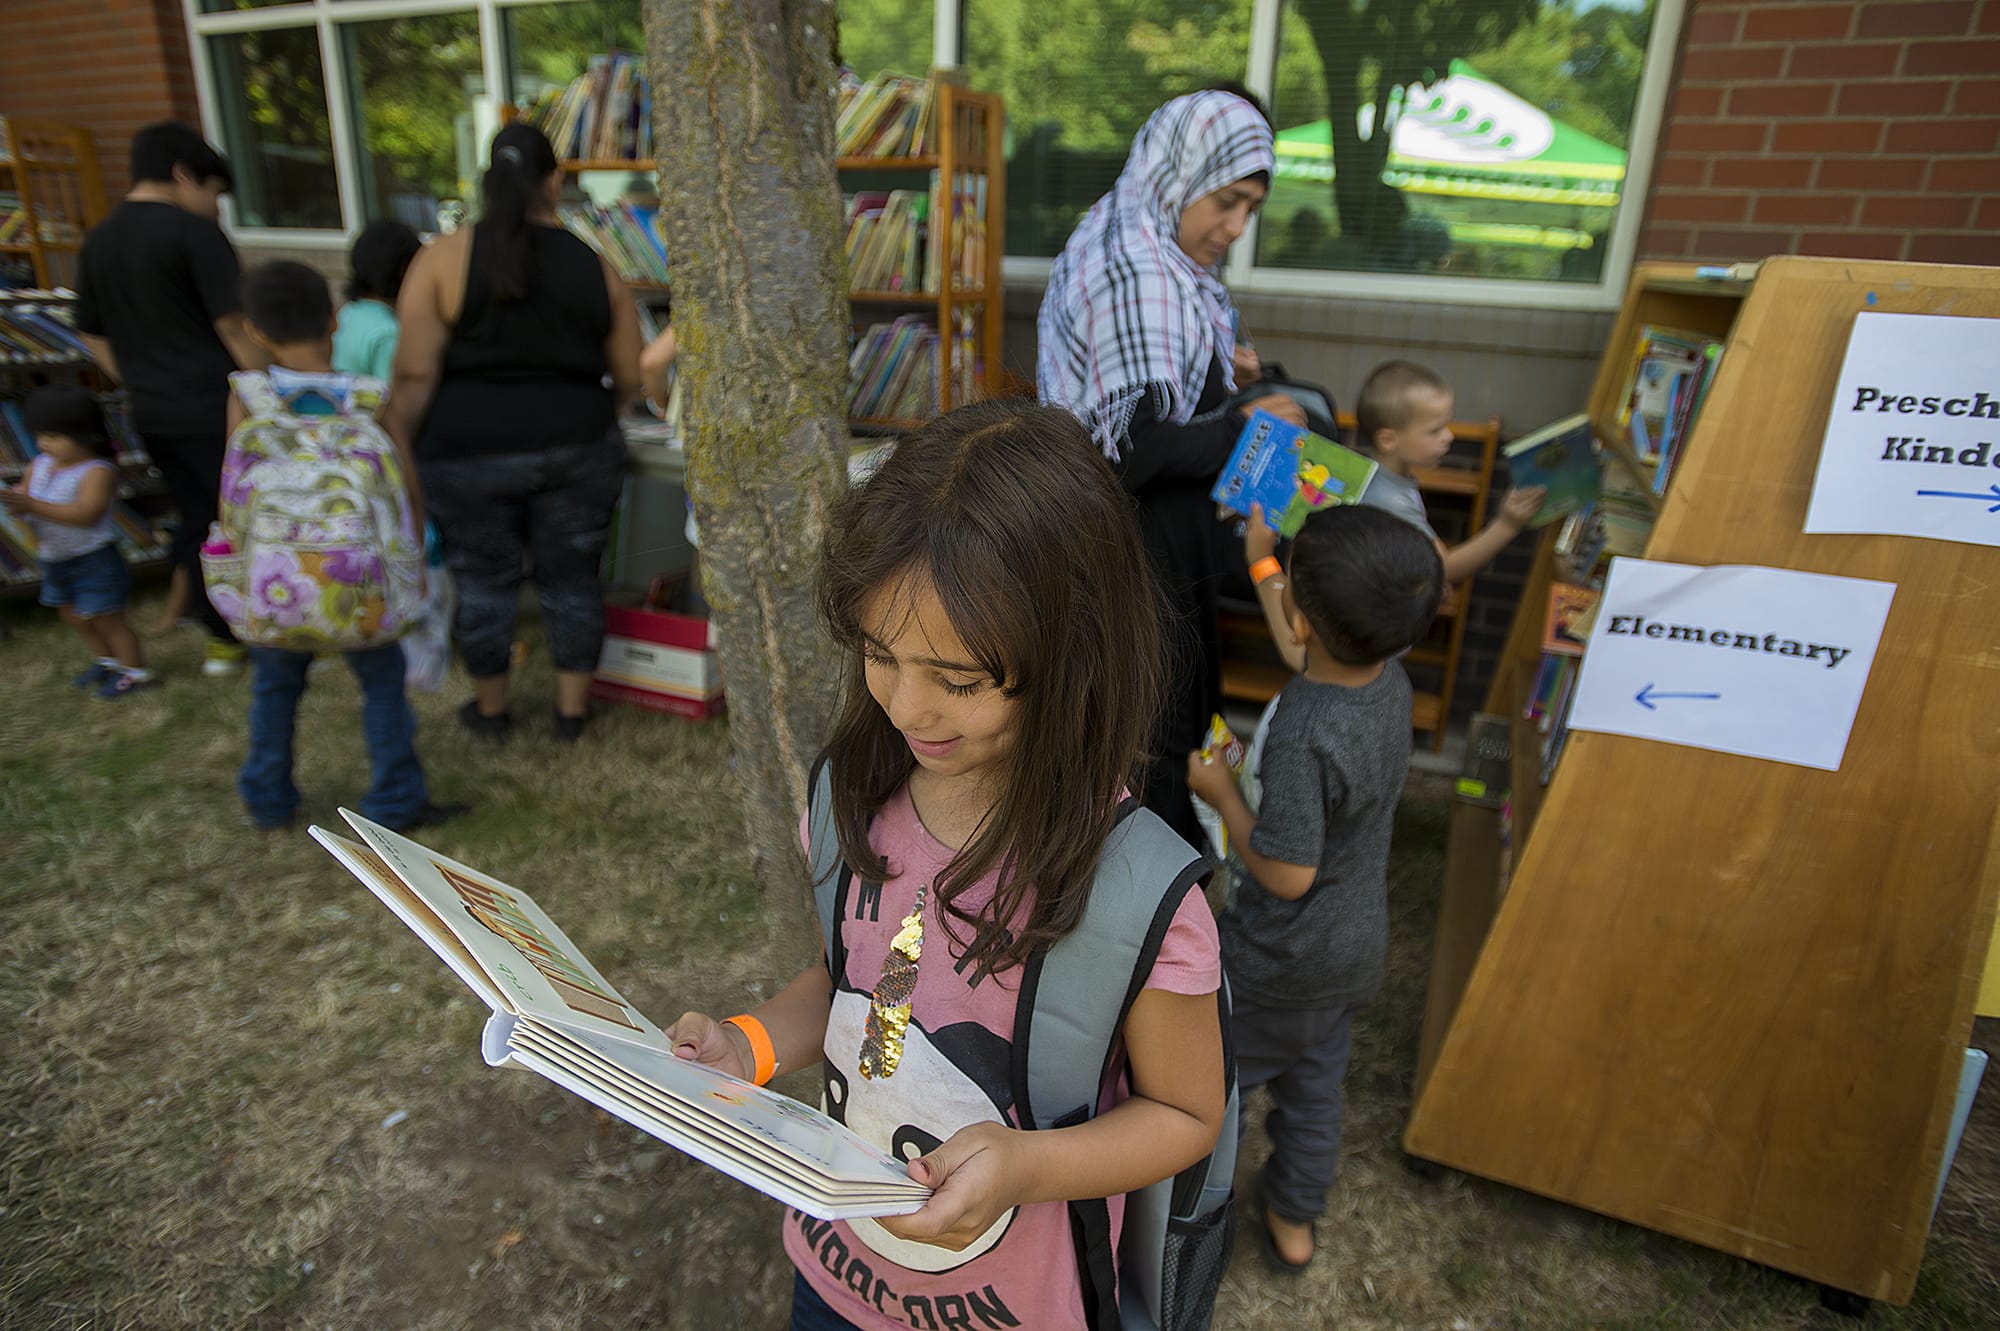 Vancouver resident Shahed Alhariri, 8, dives into a good story while visiting the free book nook with her family during the annual back-to-school readiness event at Hudson’s Bay High School on Wednesday afternoon, Aug. 14, 2019.